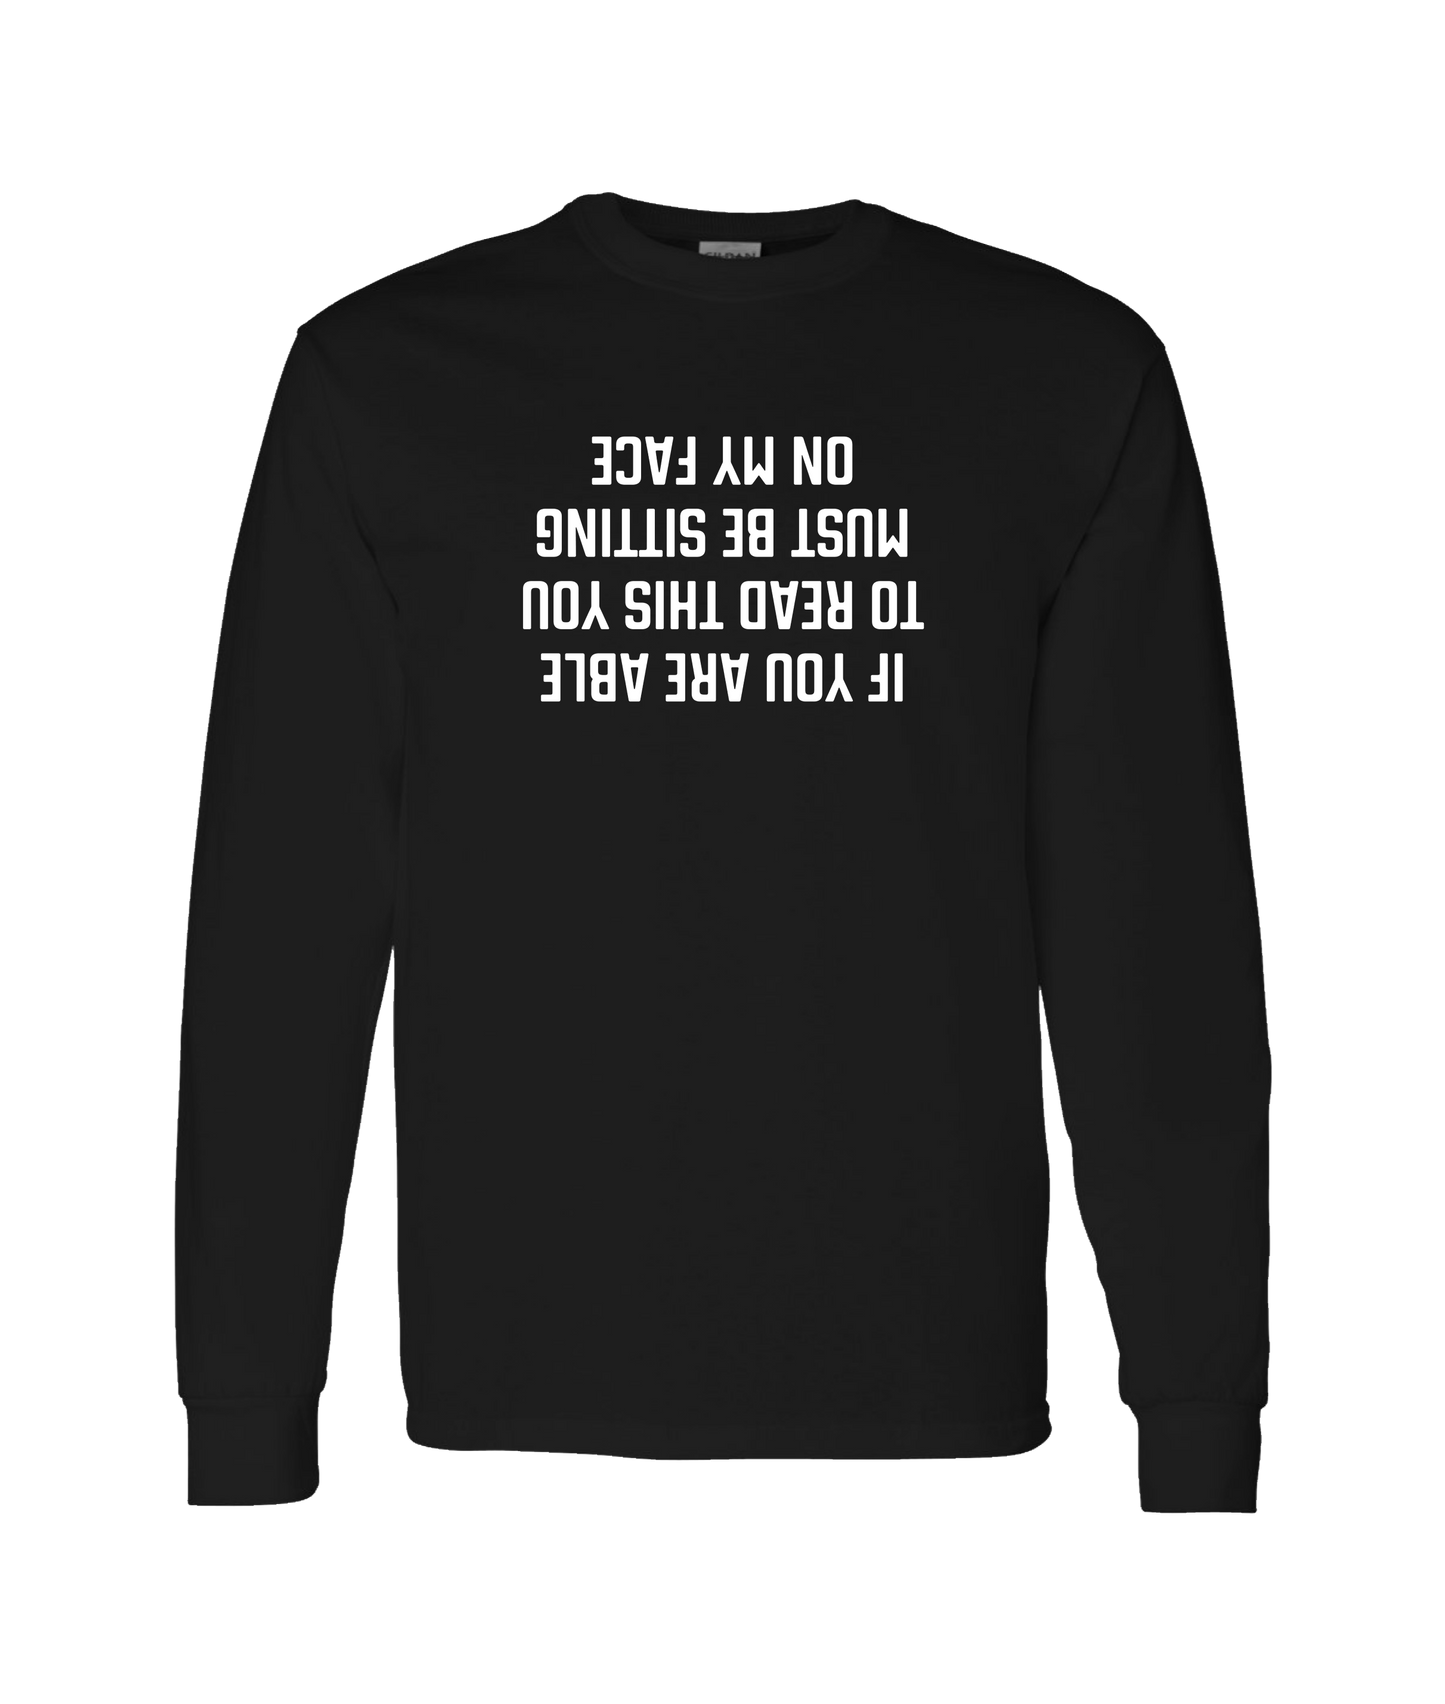 Purple Zebra - If You Are Able to Read This - Black Long Sleeve T